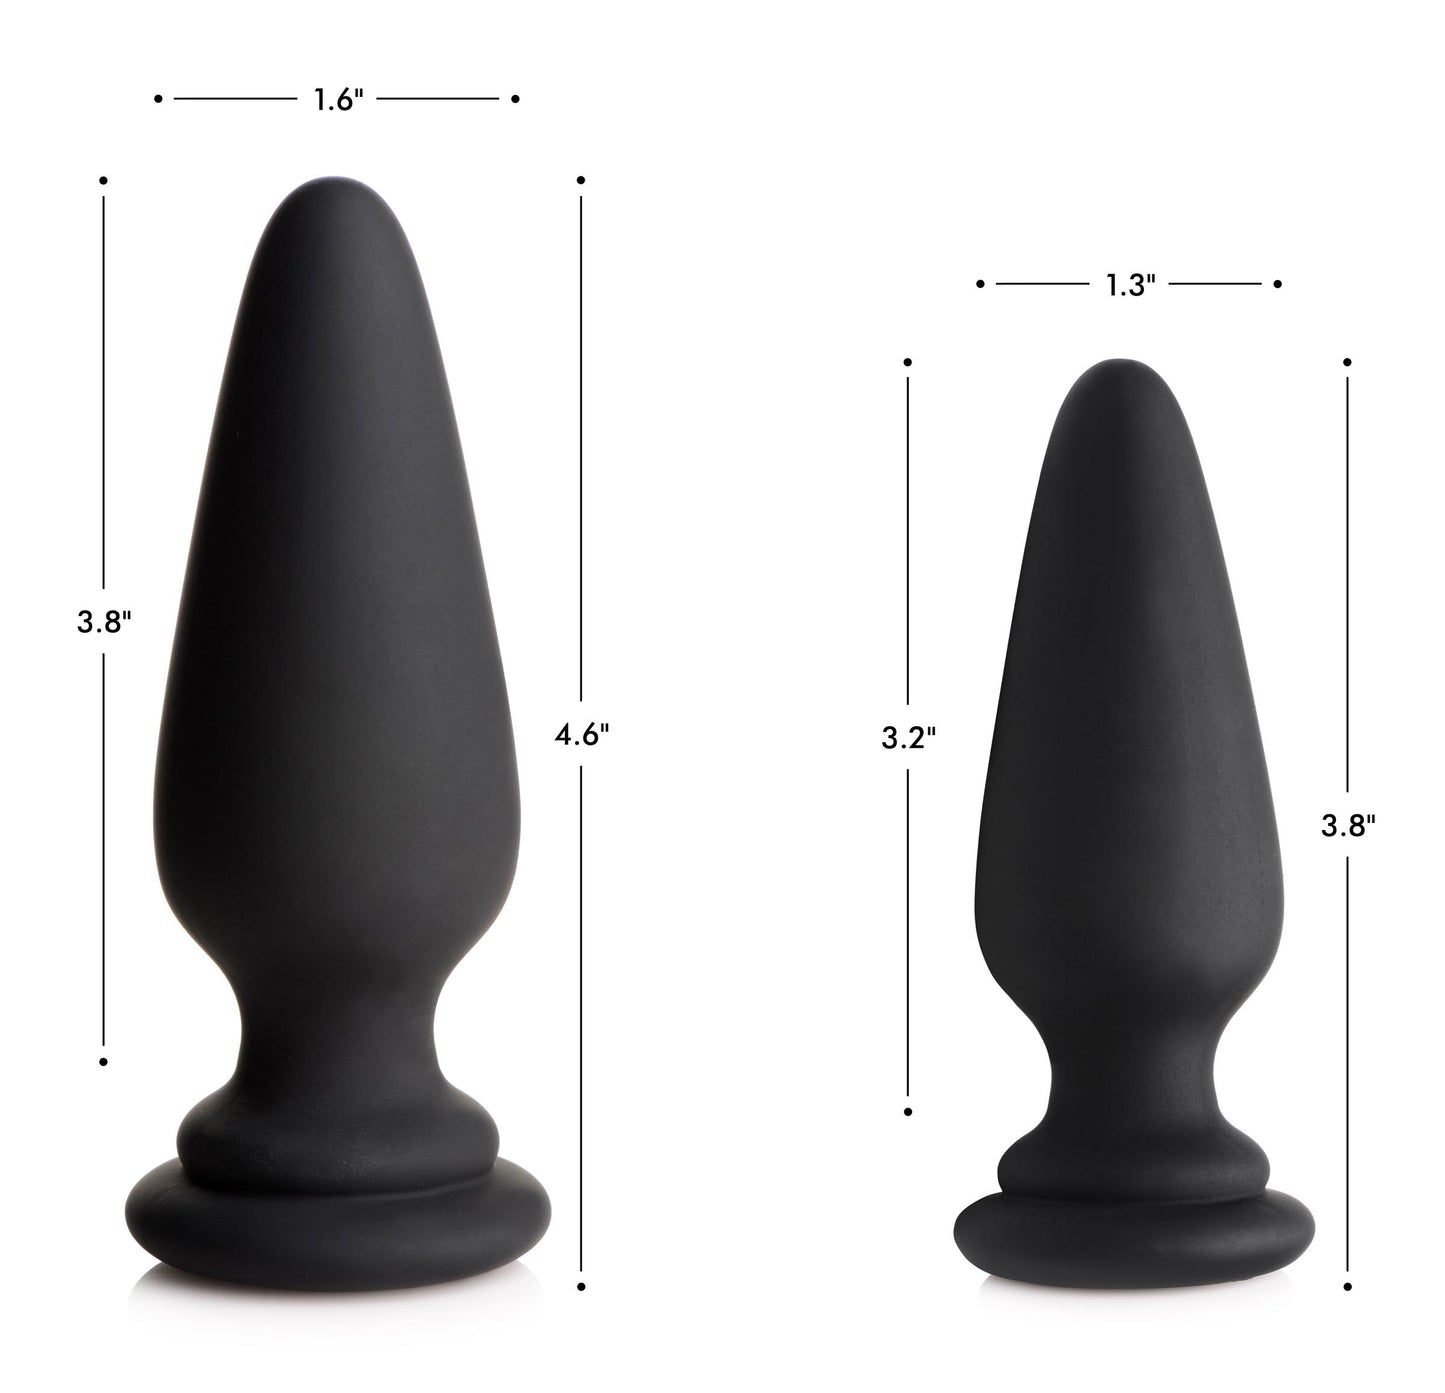 Large Anal Plug with Interchangeable Fox Tail - White - UABDSM